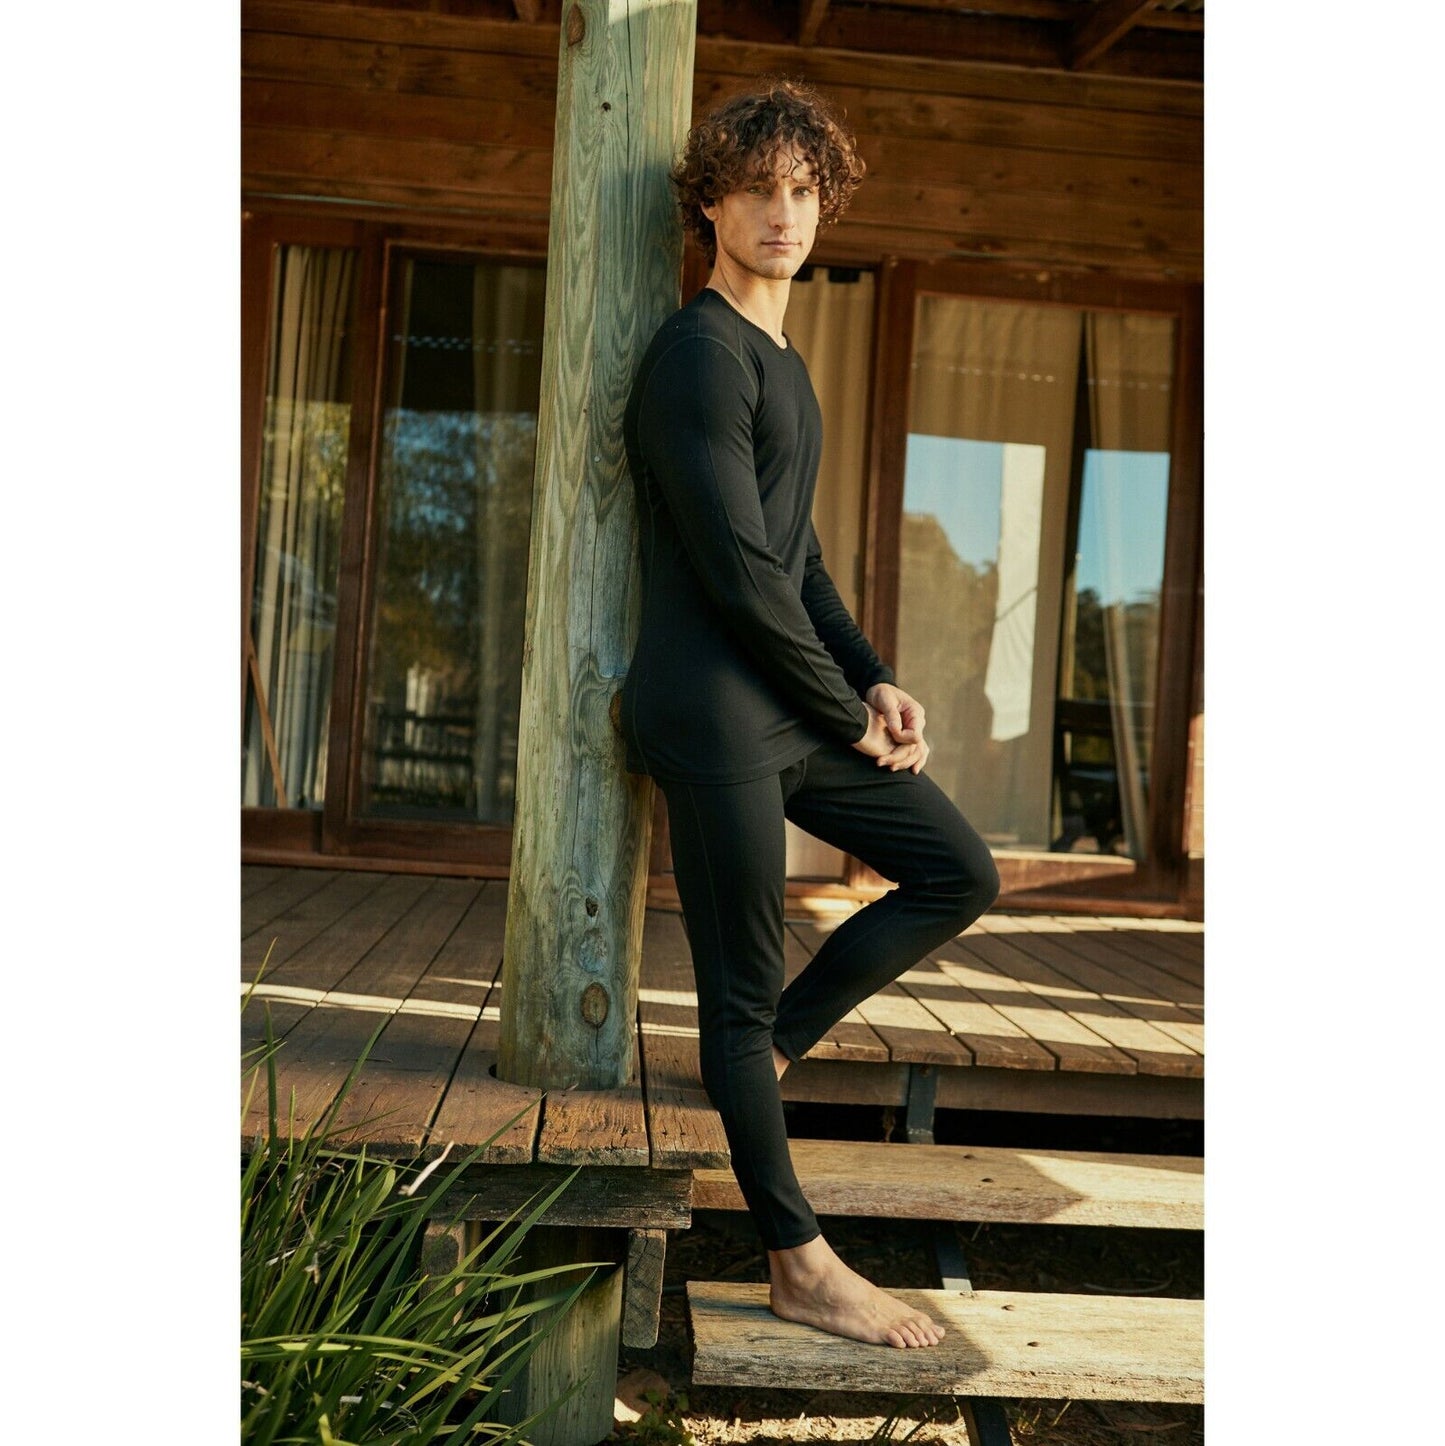 MEN'S 200 LONG SLEEVE CREW FIT: Slim LAYER: Base Layers OZWBL002